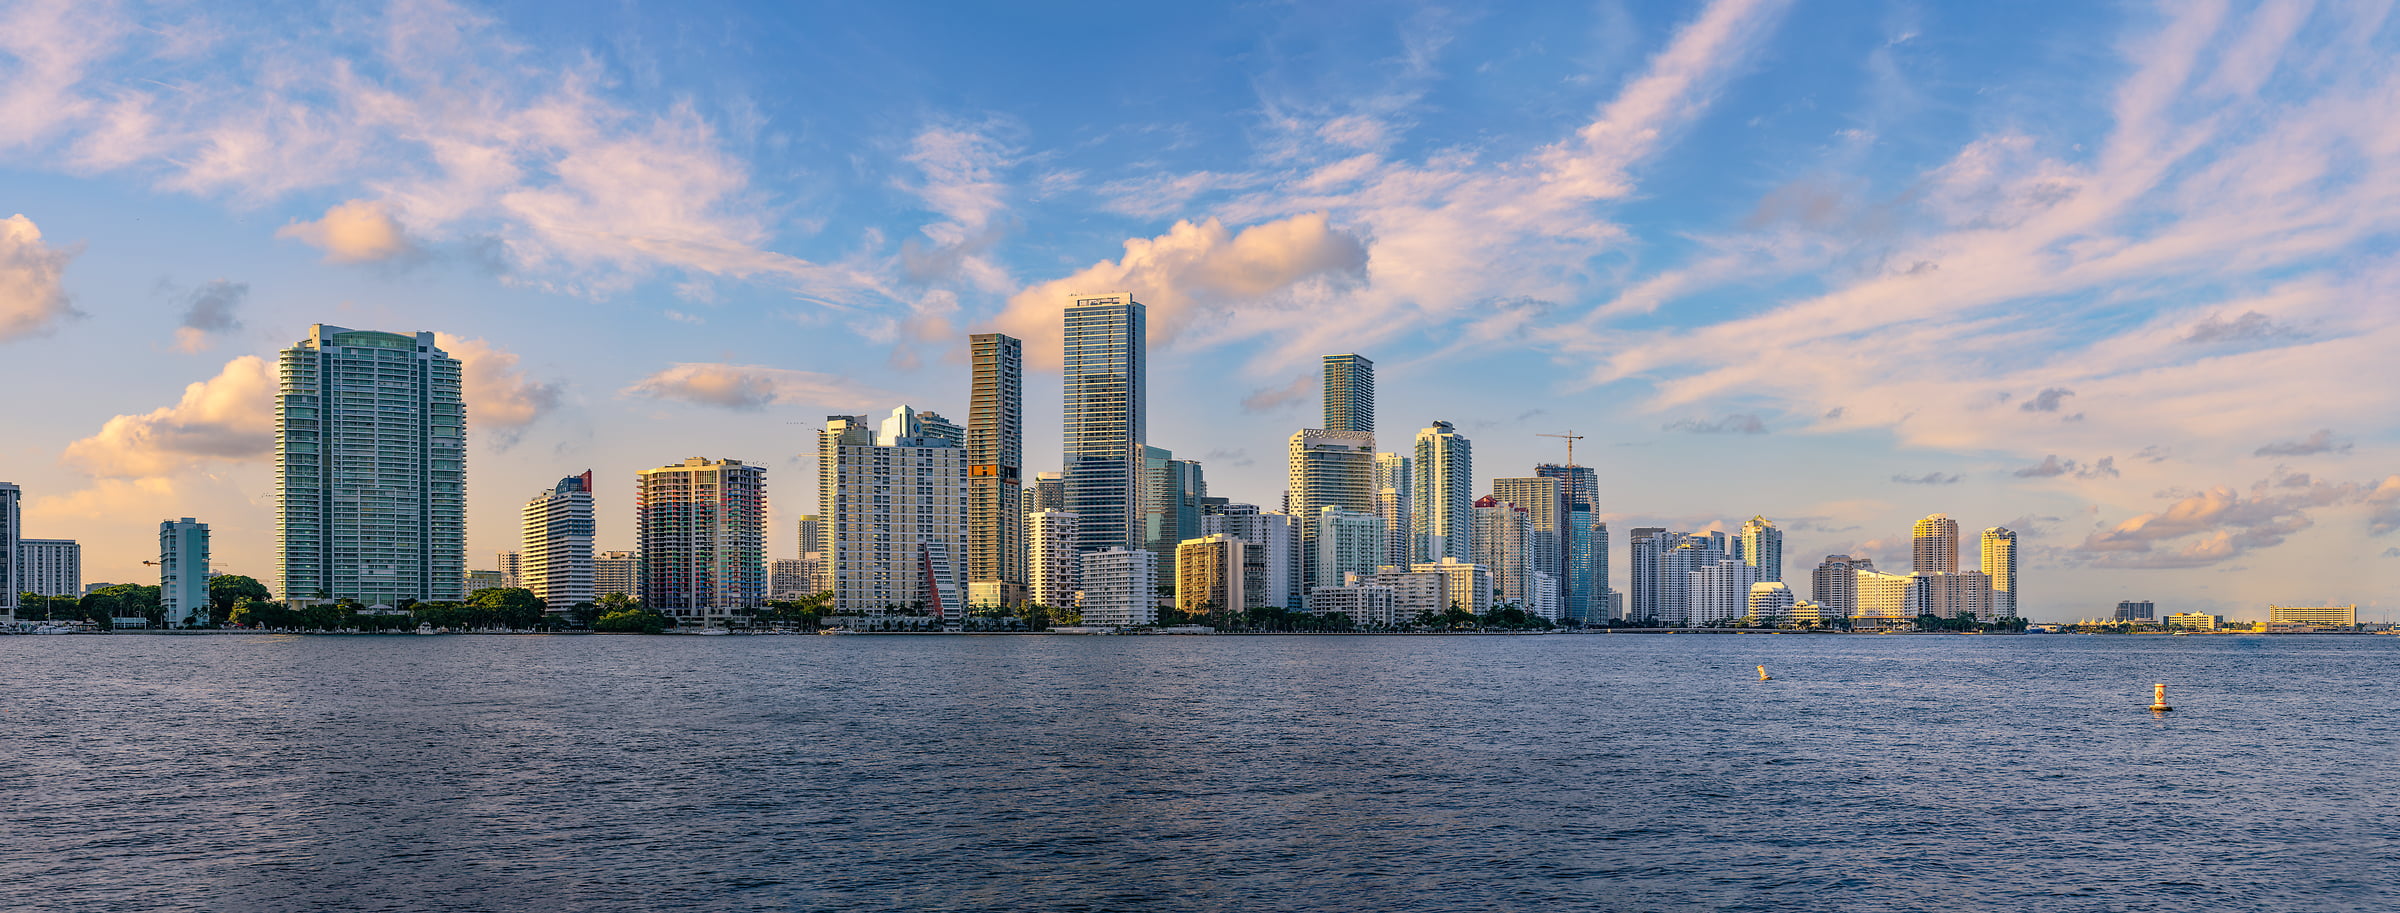 749 megapixels! A very high resolution, large-format VAST photo print of the Miami skyline at sunset; photograph created by Chris Blake at Miami, Florida